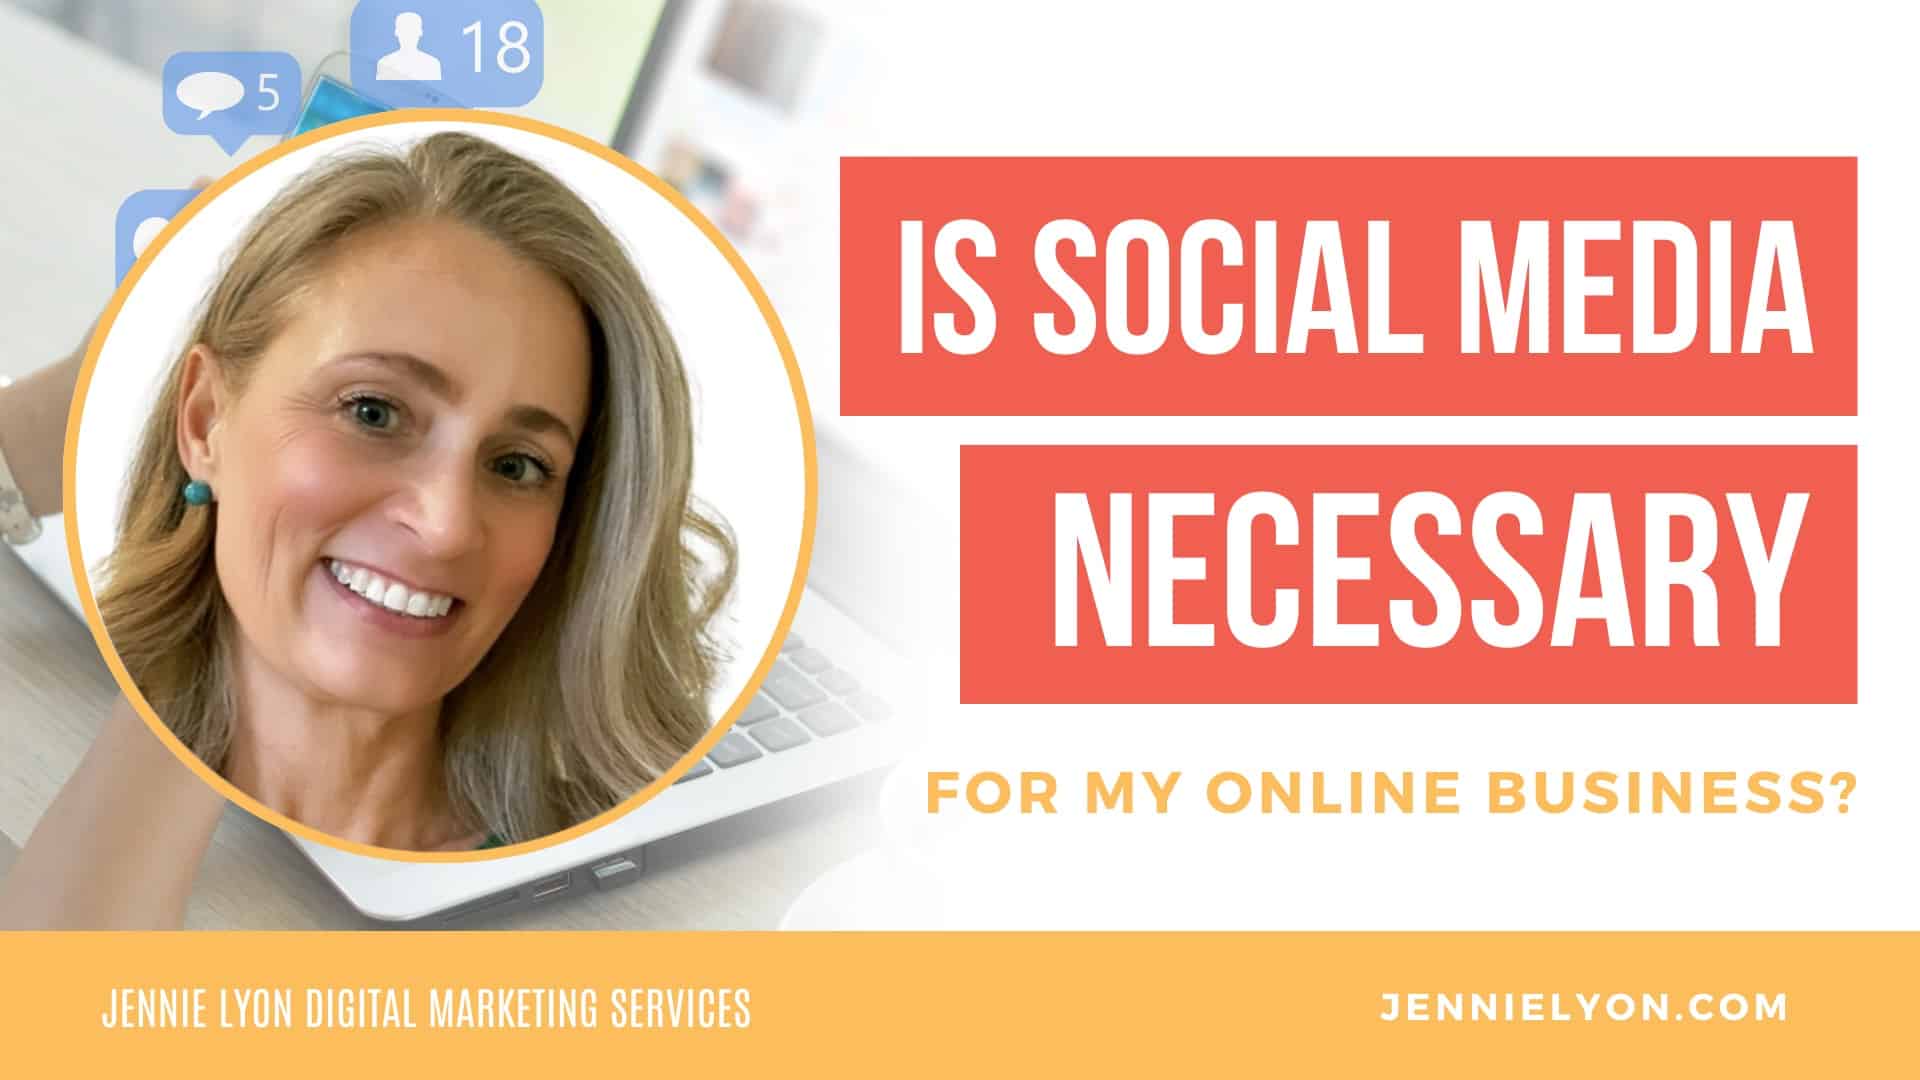 Is Social Media Necessary for My Online Business?